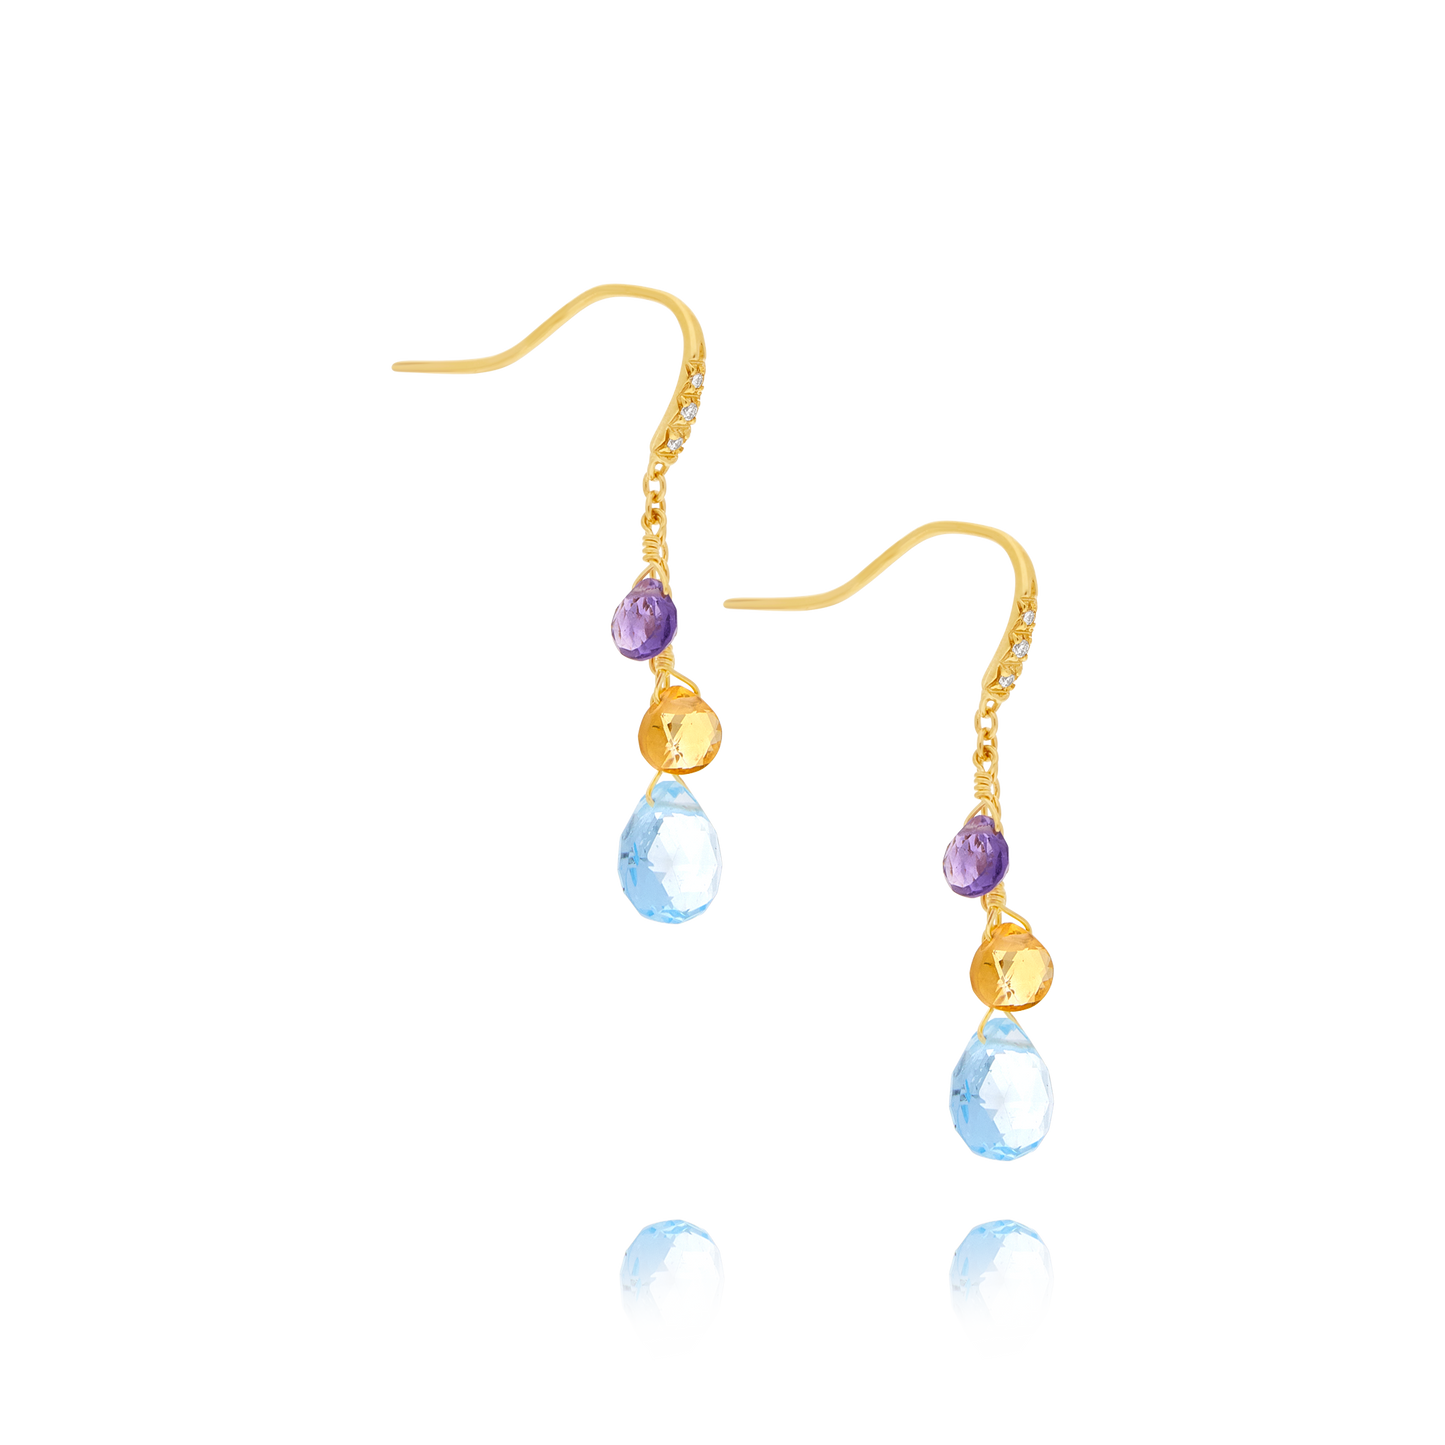 Marco Bicego Paradise Collection 18ct Yellow Gold Mixed Topaz Small Drop Earrings